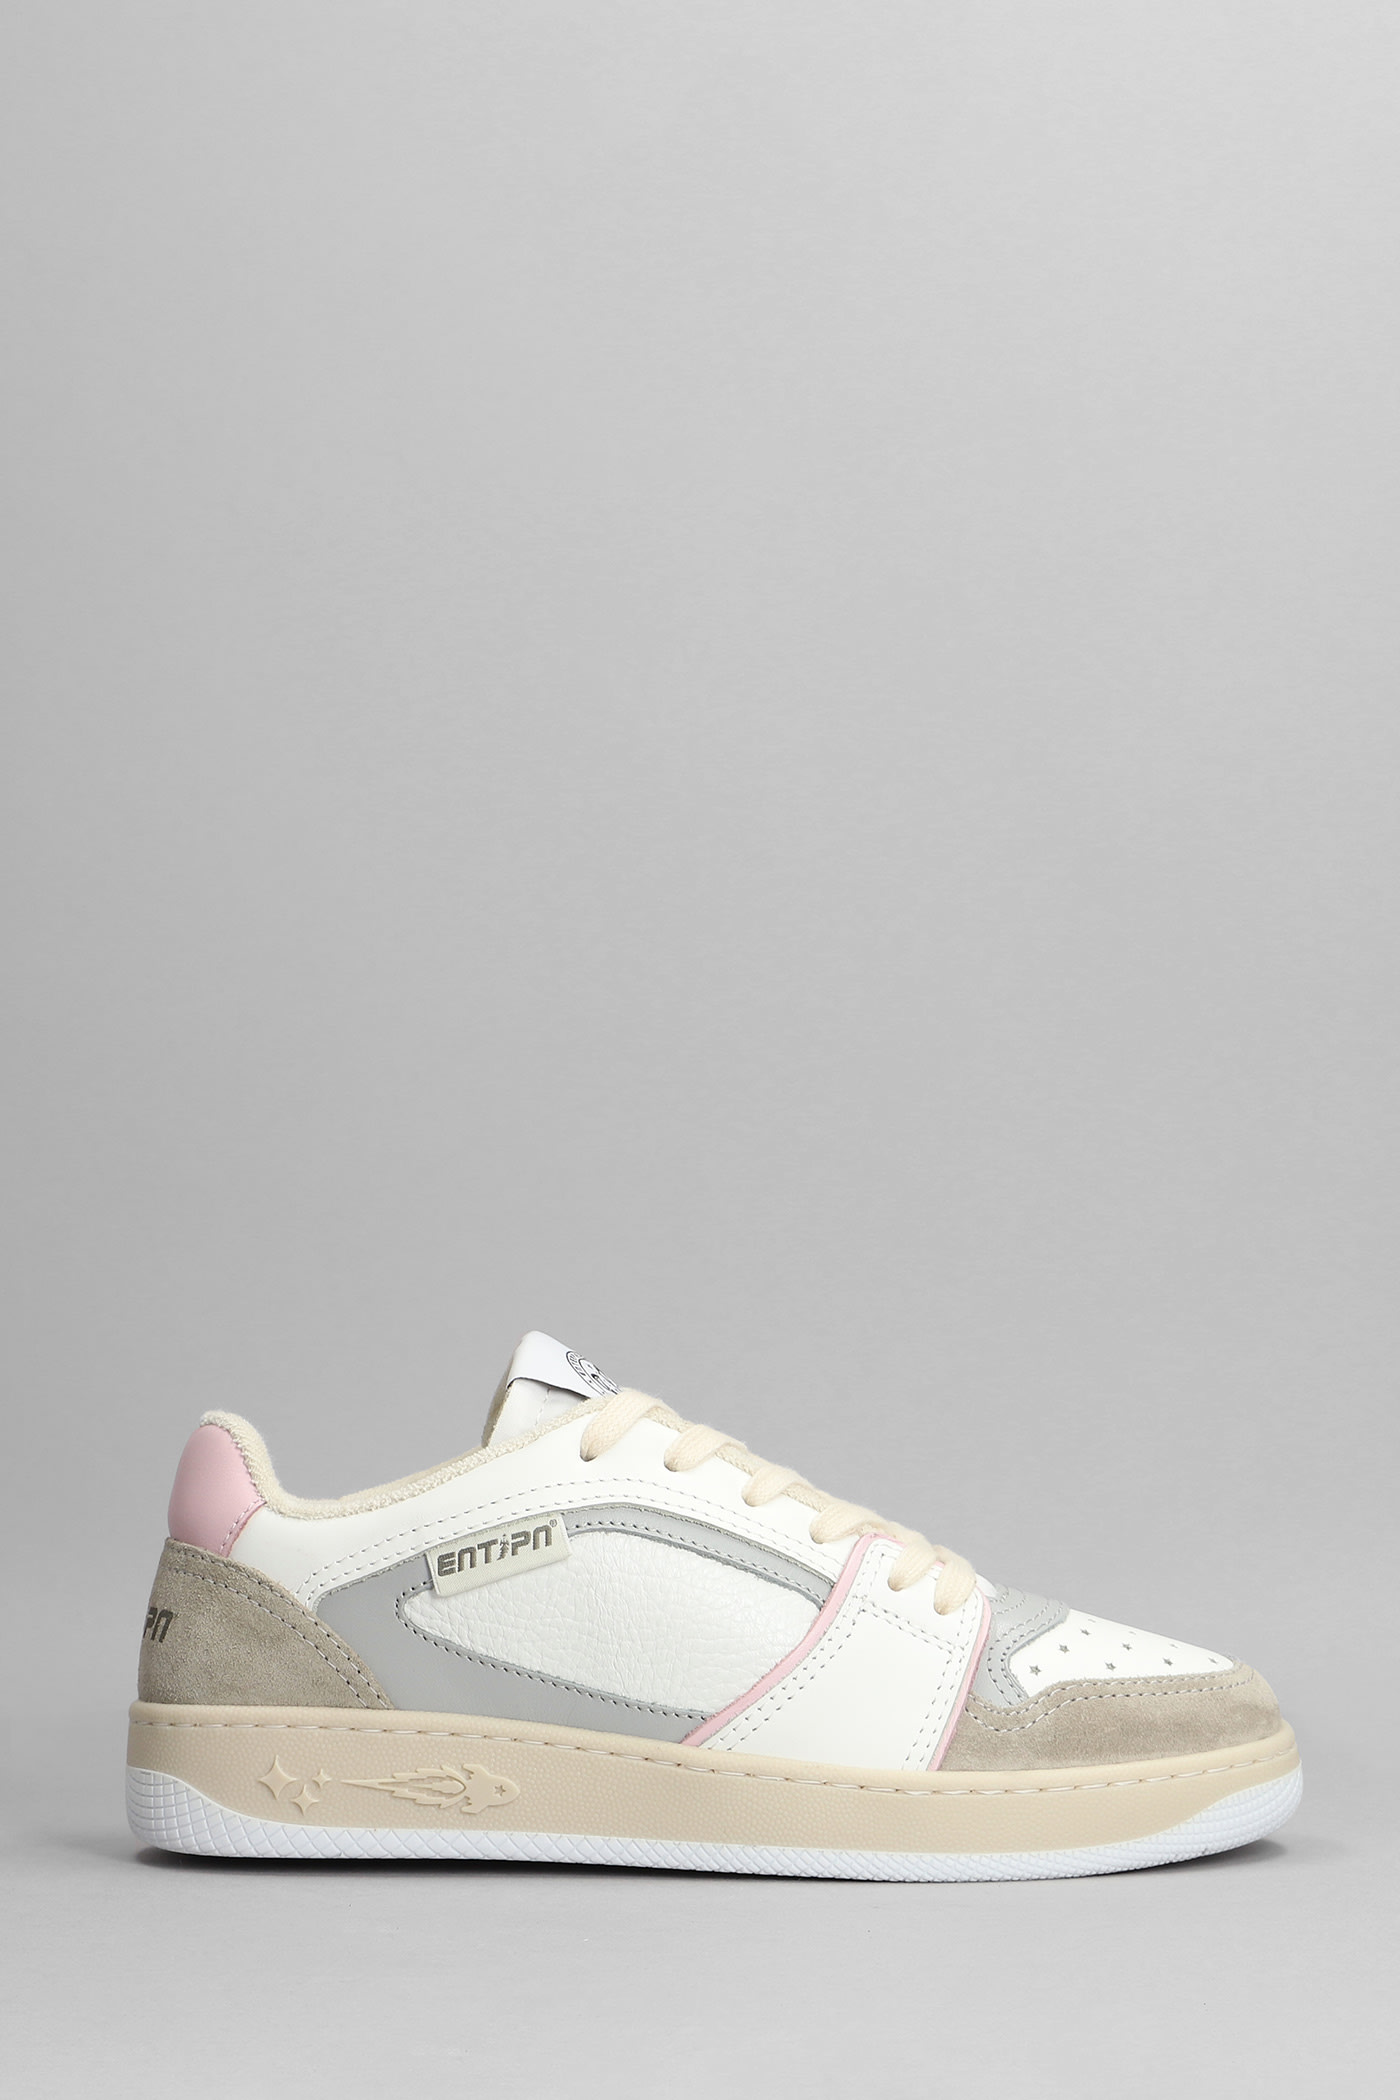 ENTERPRISE JAPAN TAG SNEAKERS IN BEIGE SUEDE AND LEATHER